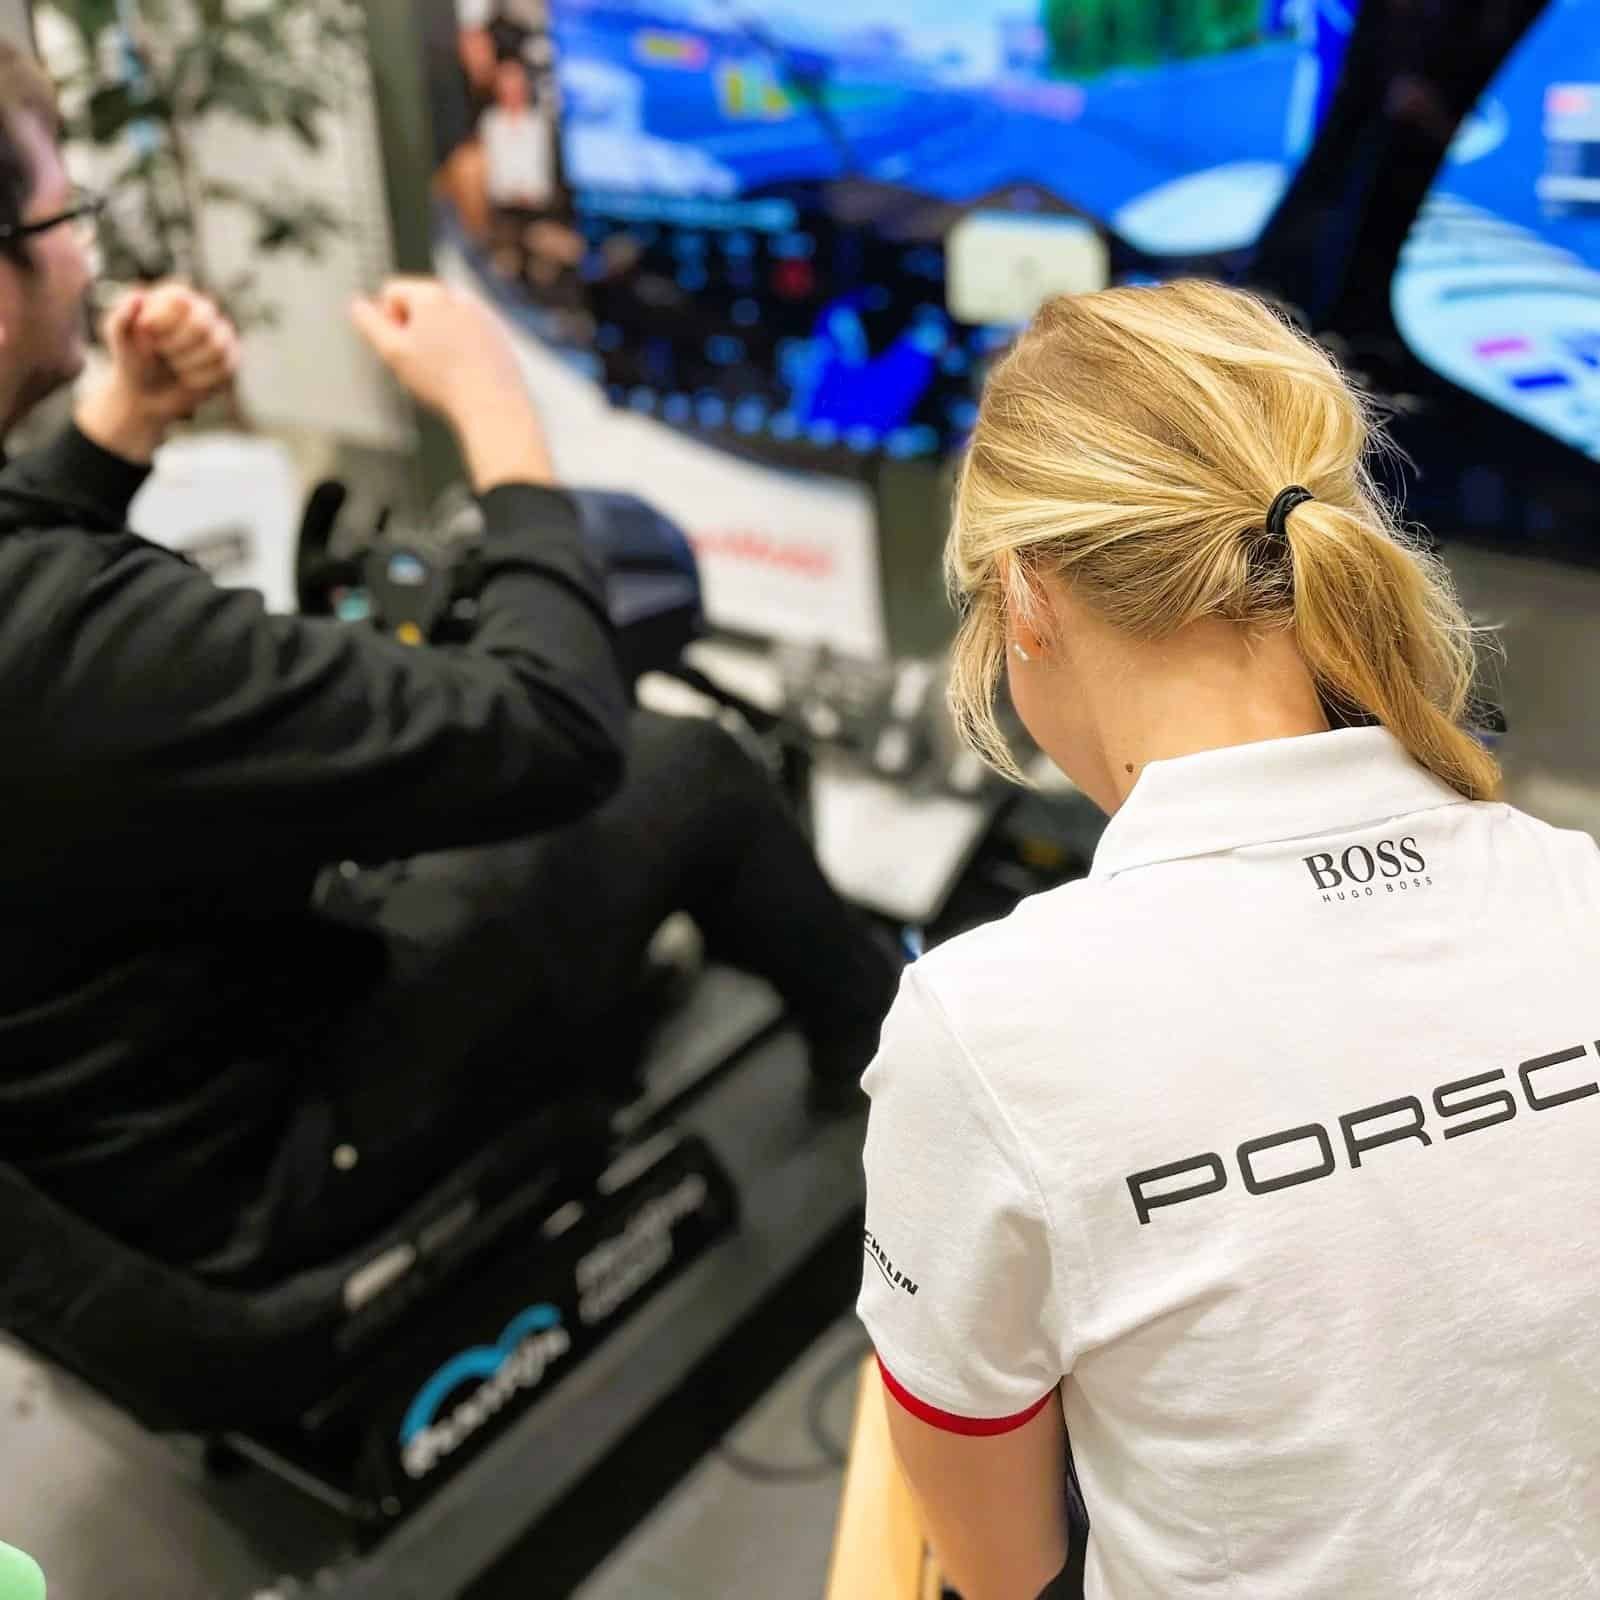 RoarFun Clients Exxon Mobil Porsche immersive simulator with motion and virtual reality